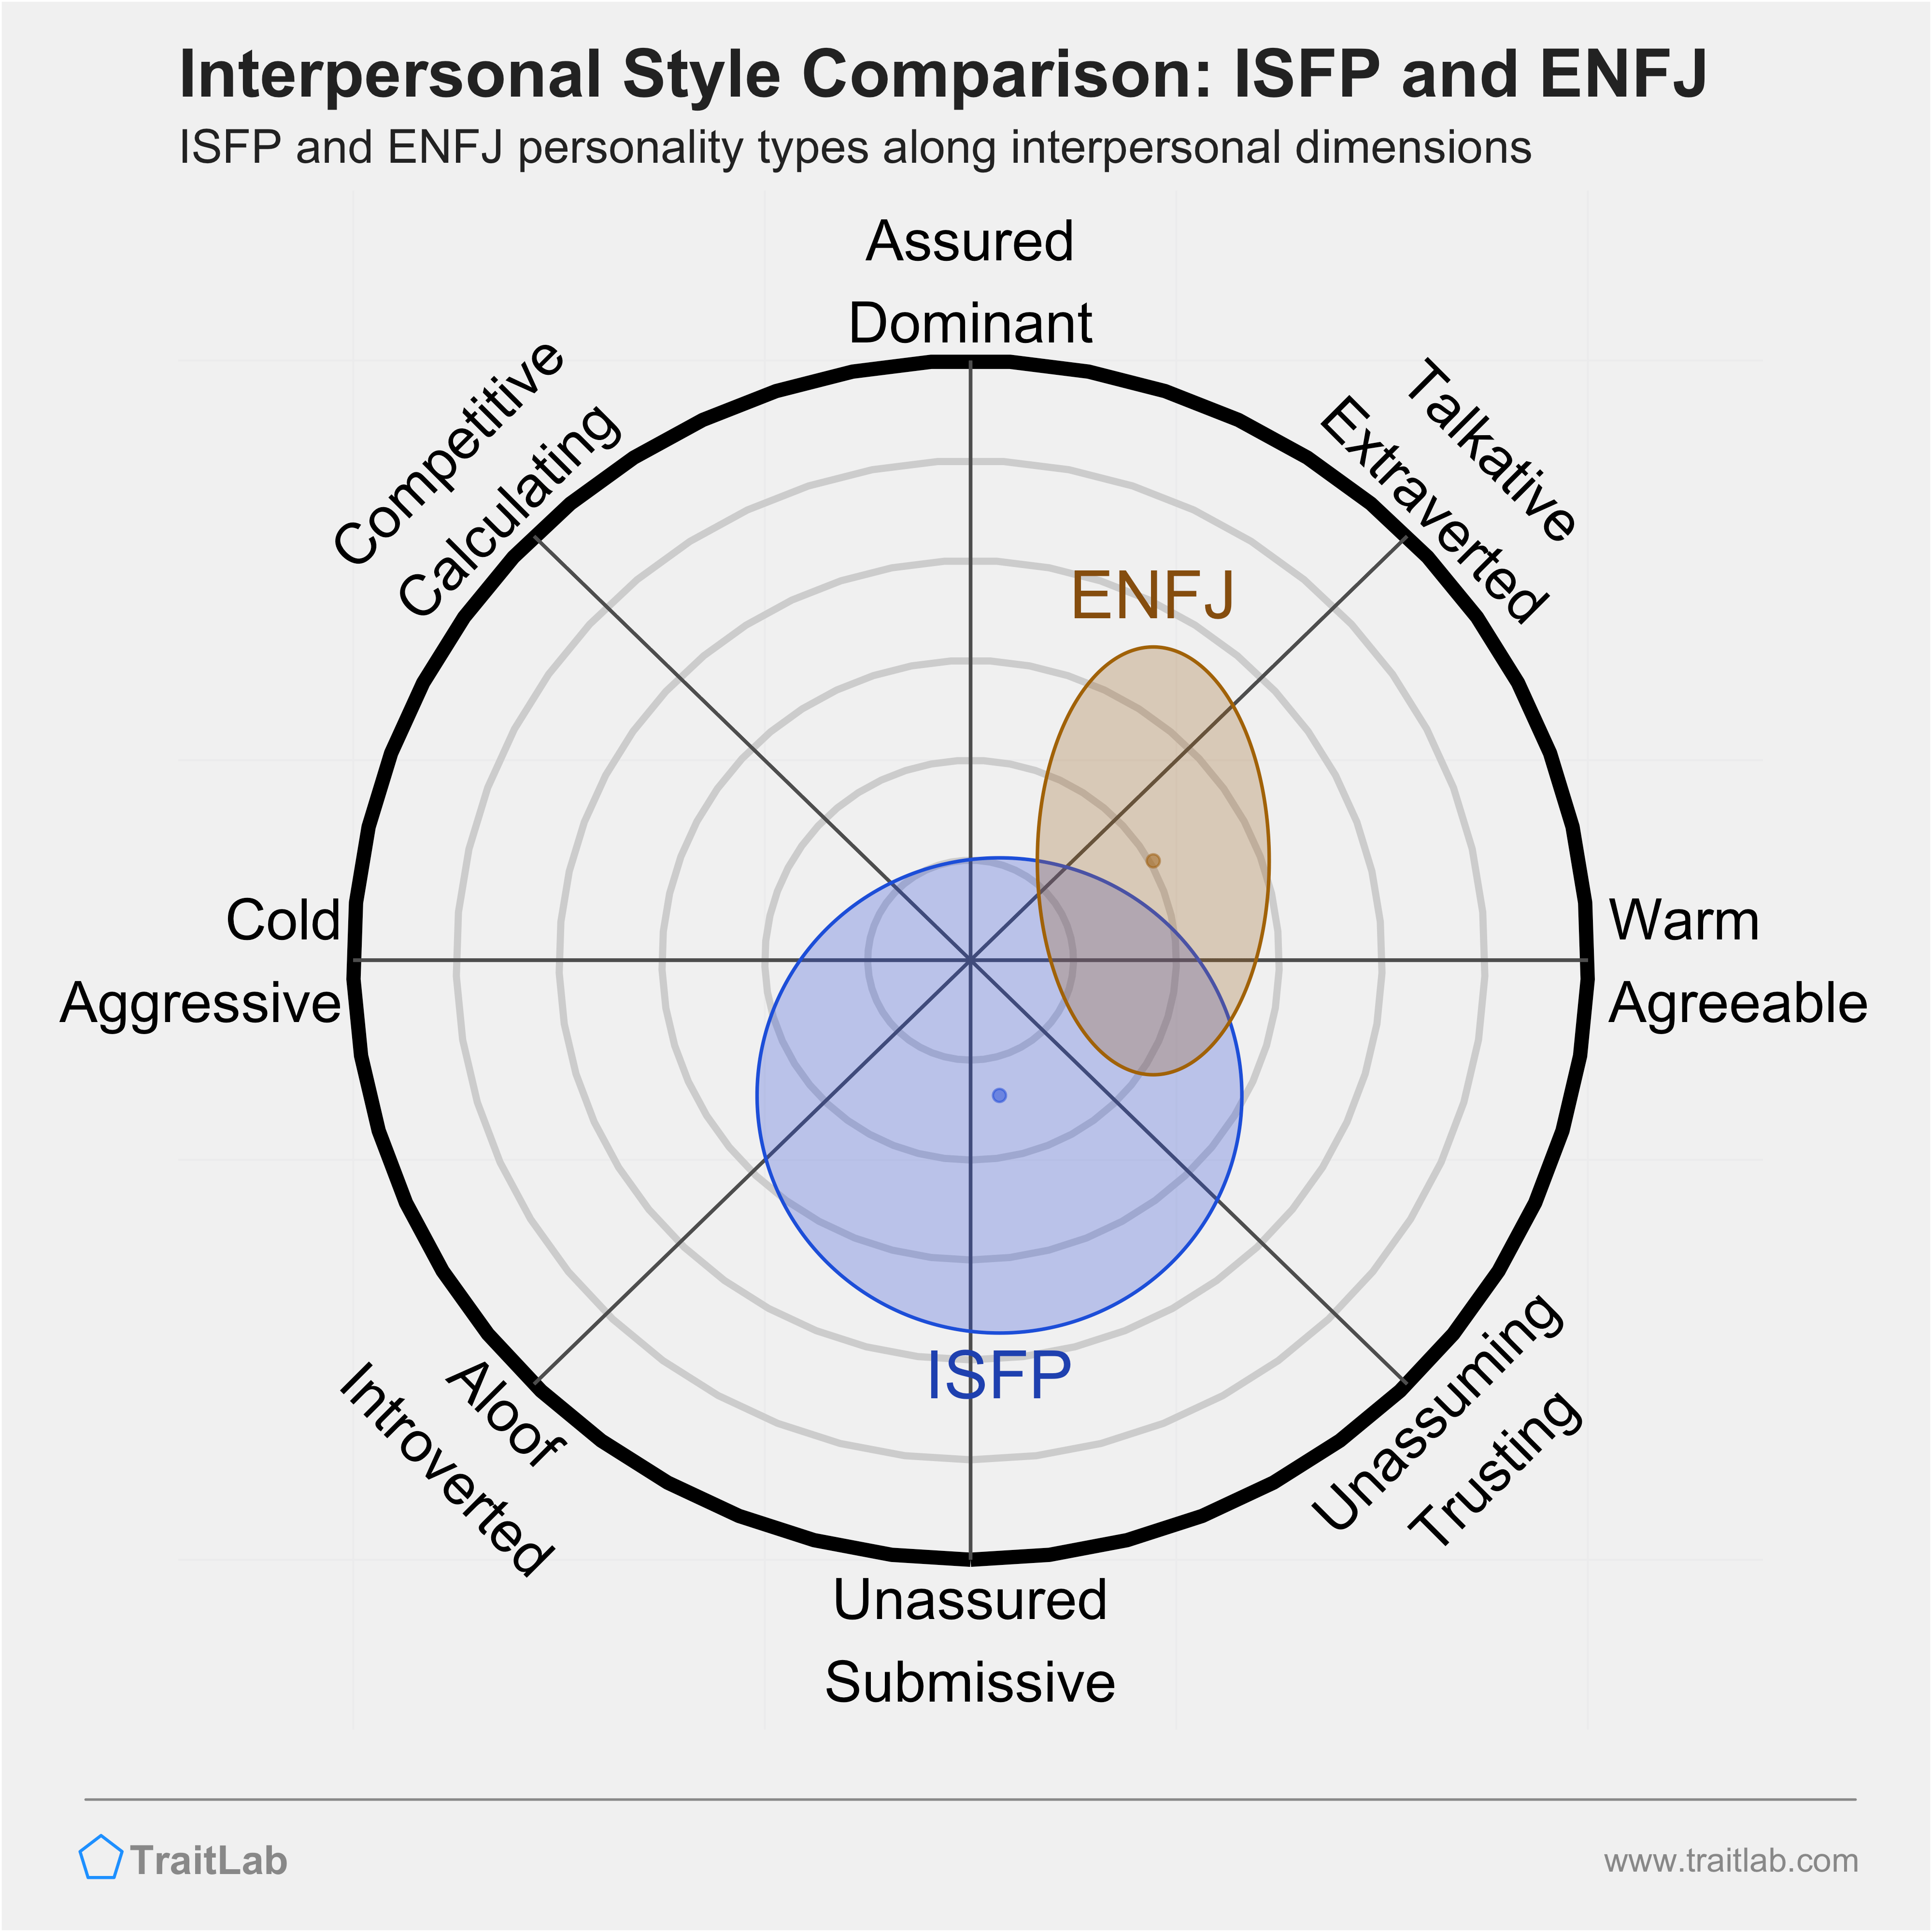 ISFP and ENFJ comparison across interpersonal dimensions